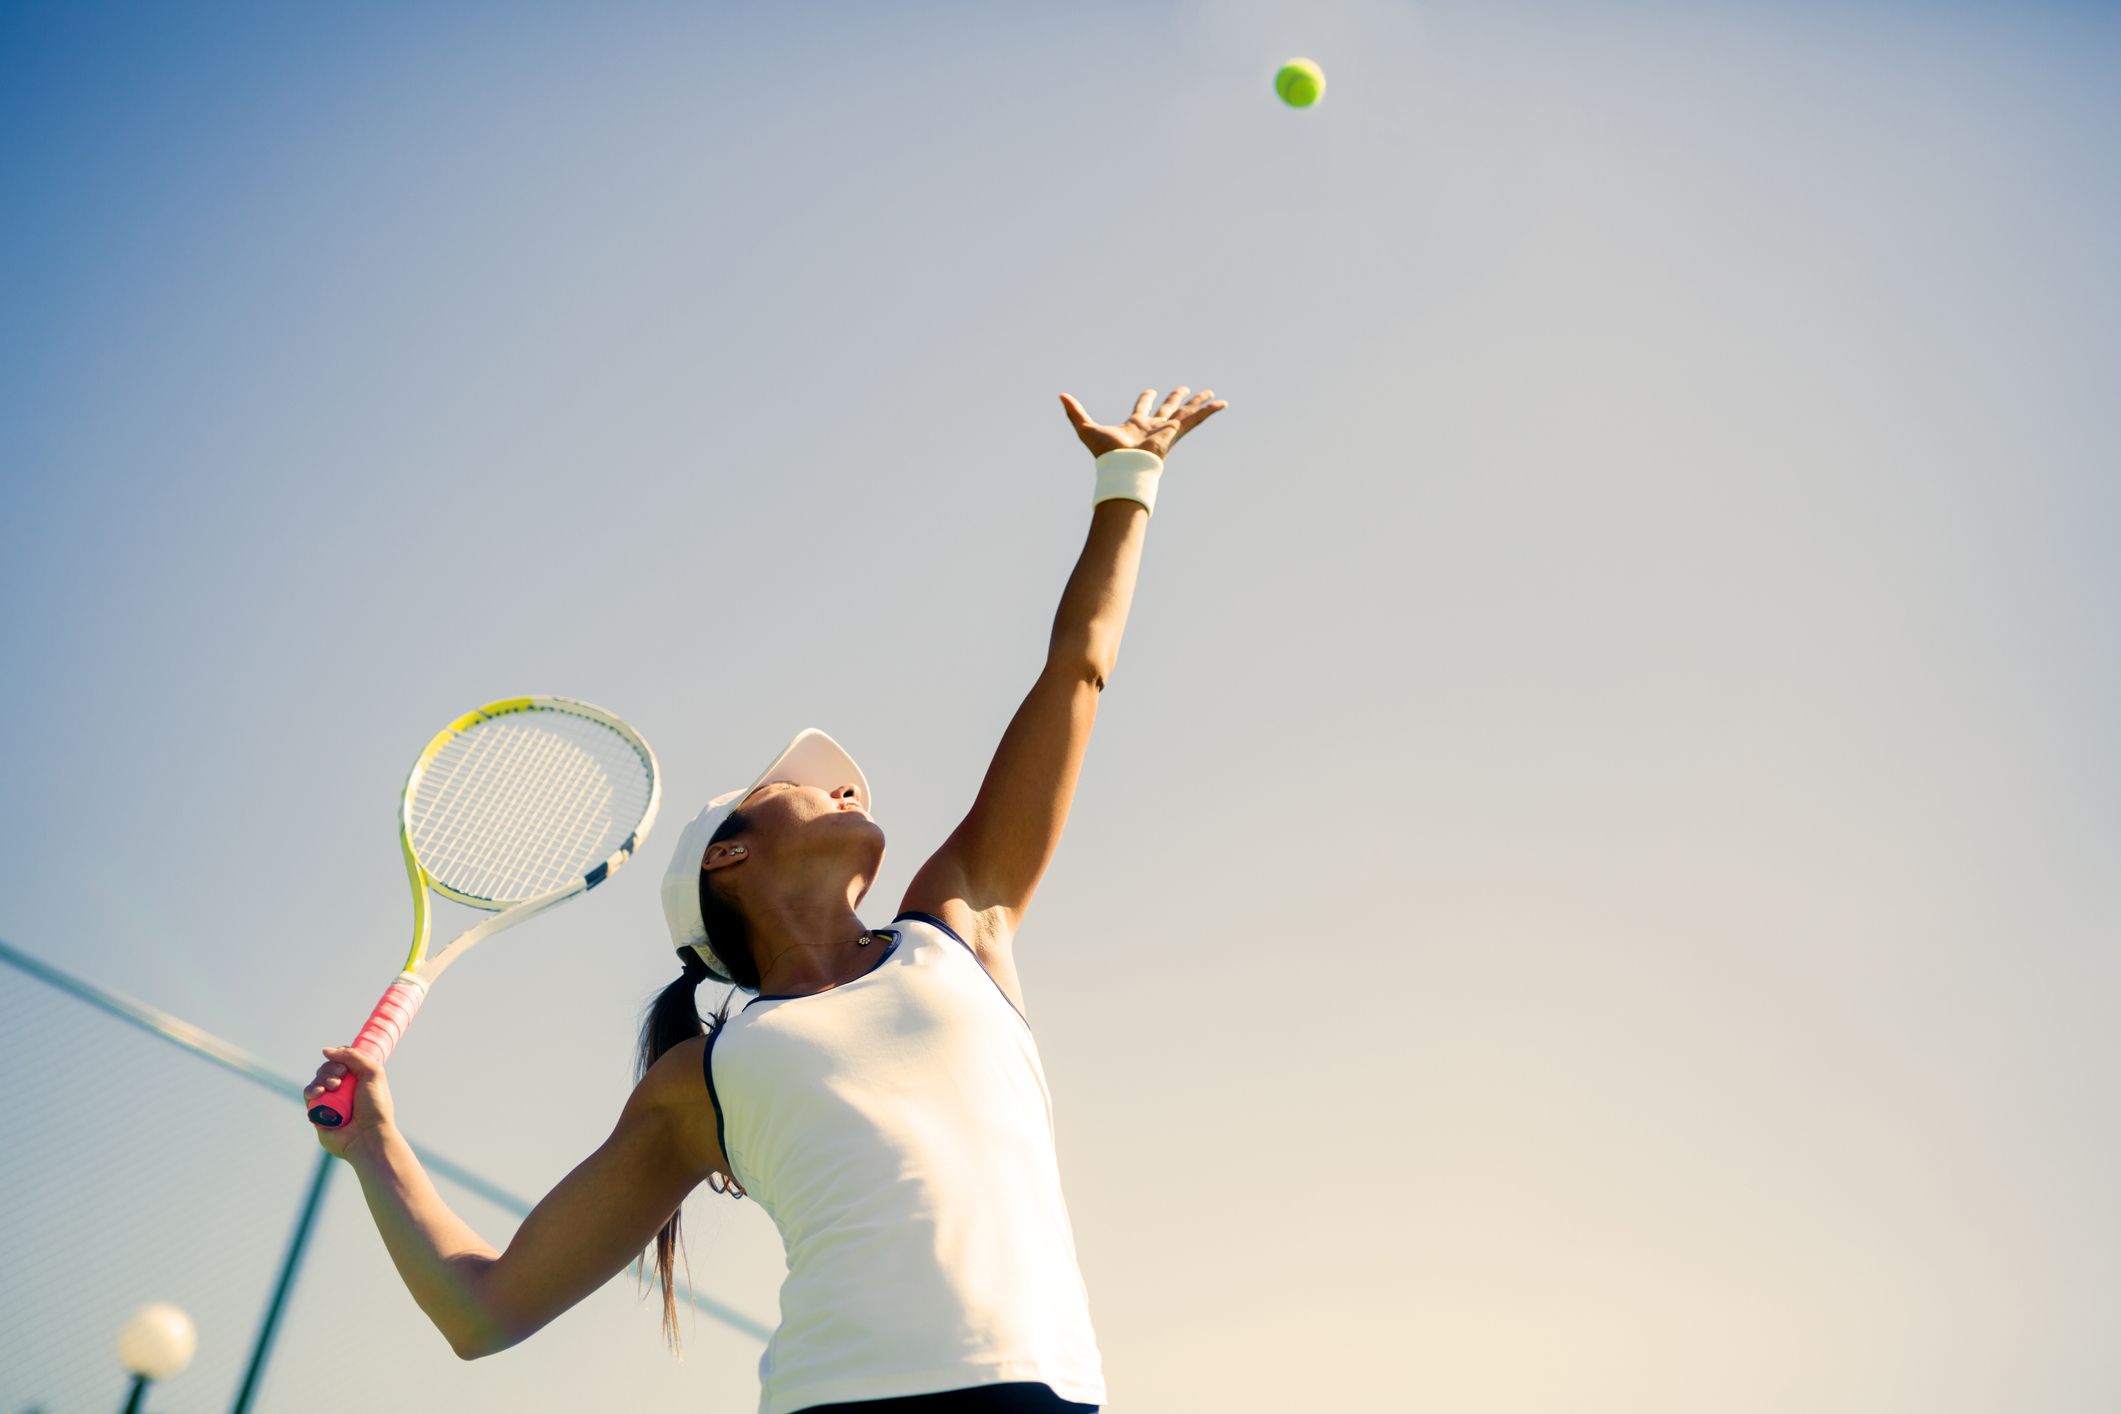 A female tennis player prepares to serve the ball during a match.